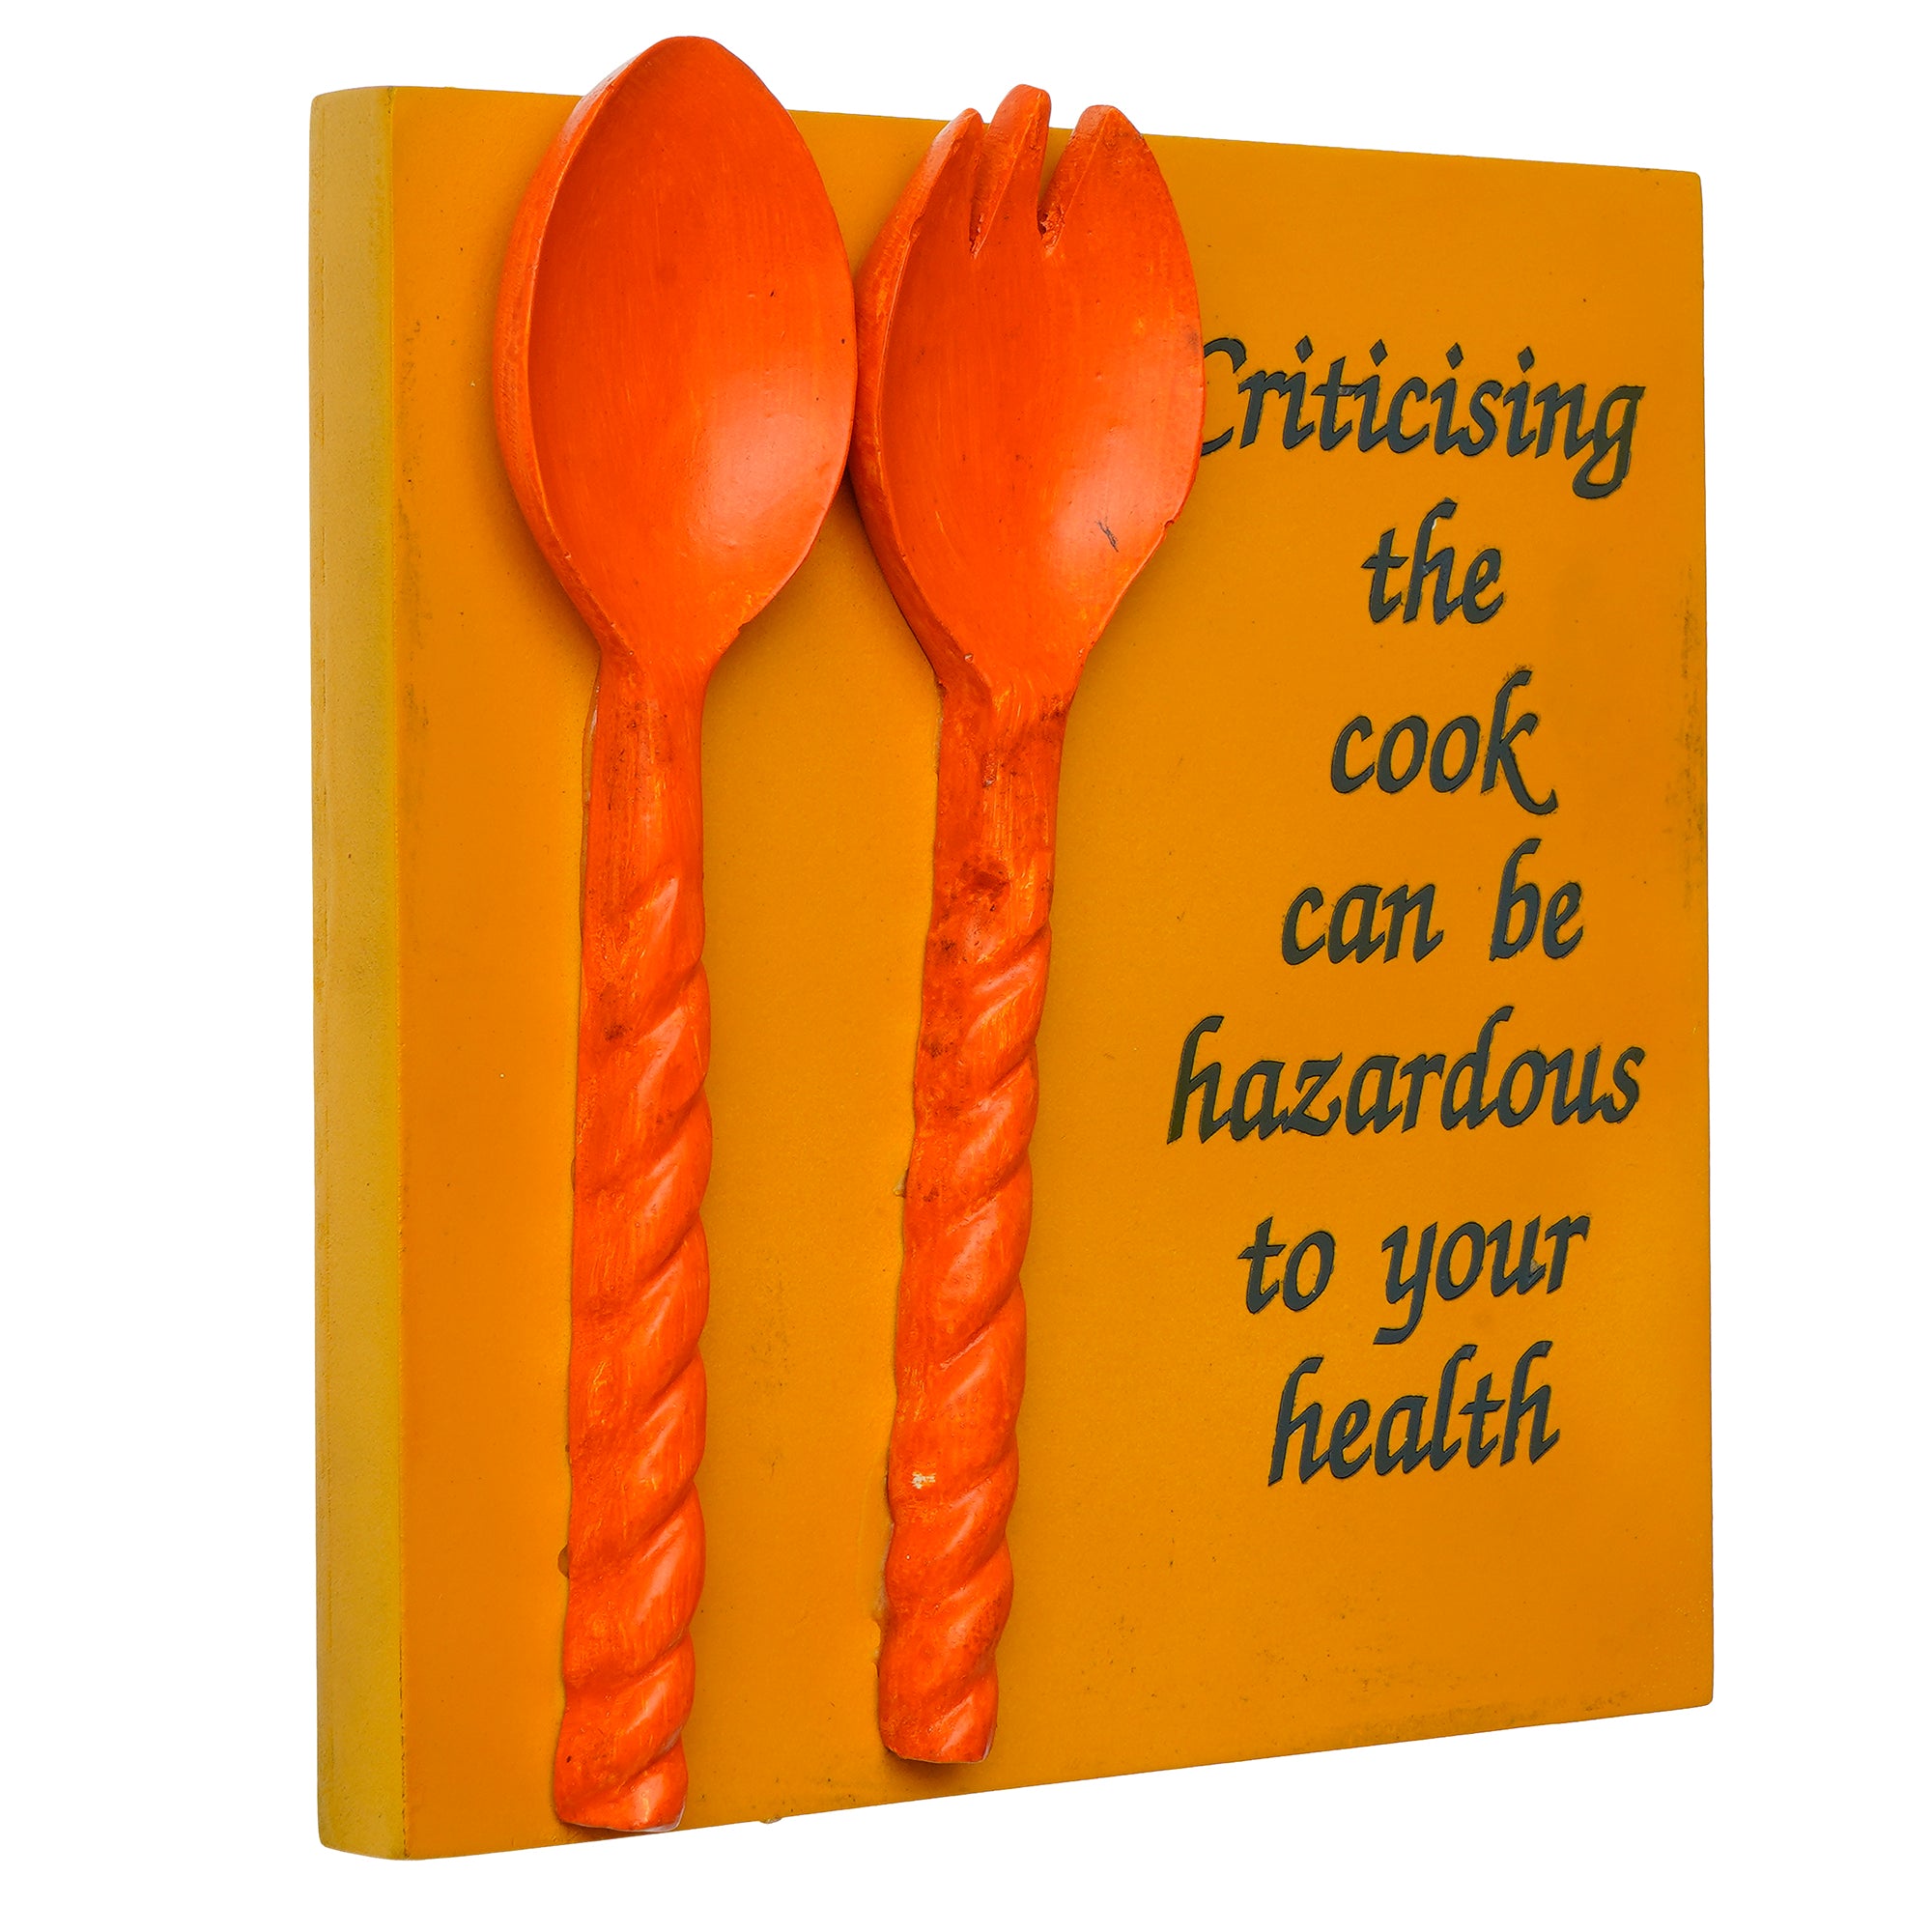 "Criticising the cook can be hazardous to your health" Kitchen Theme Decorative Wooden Wall Hanging 6